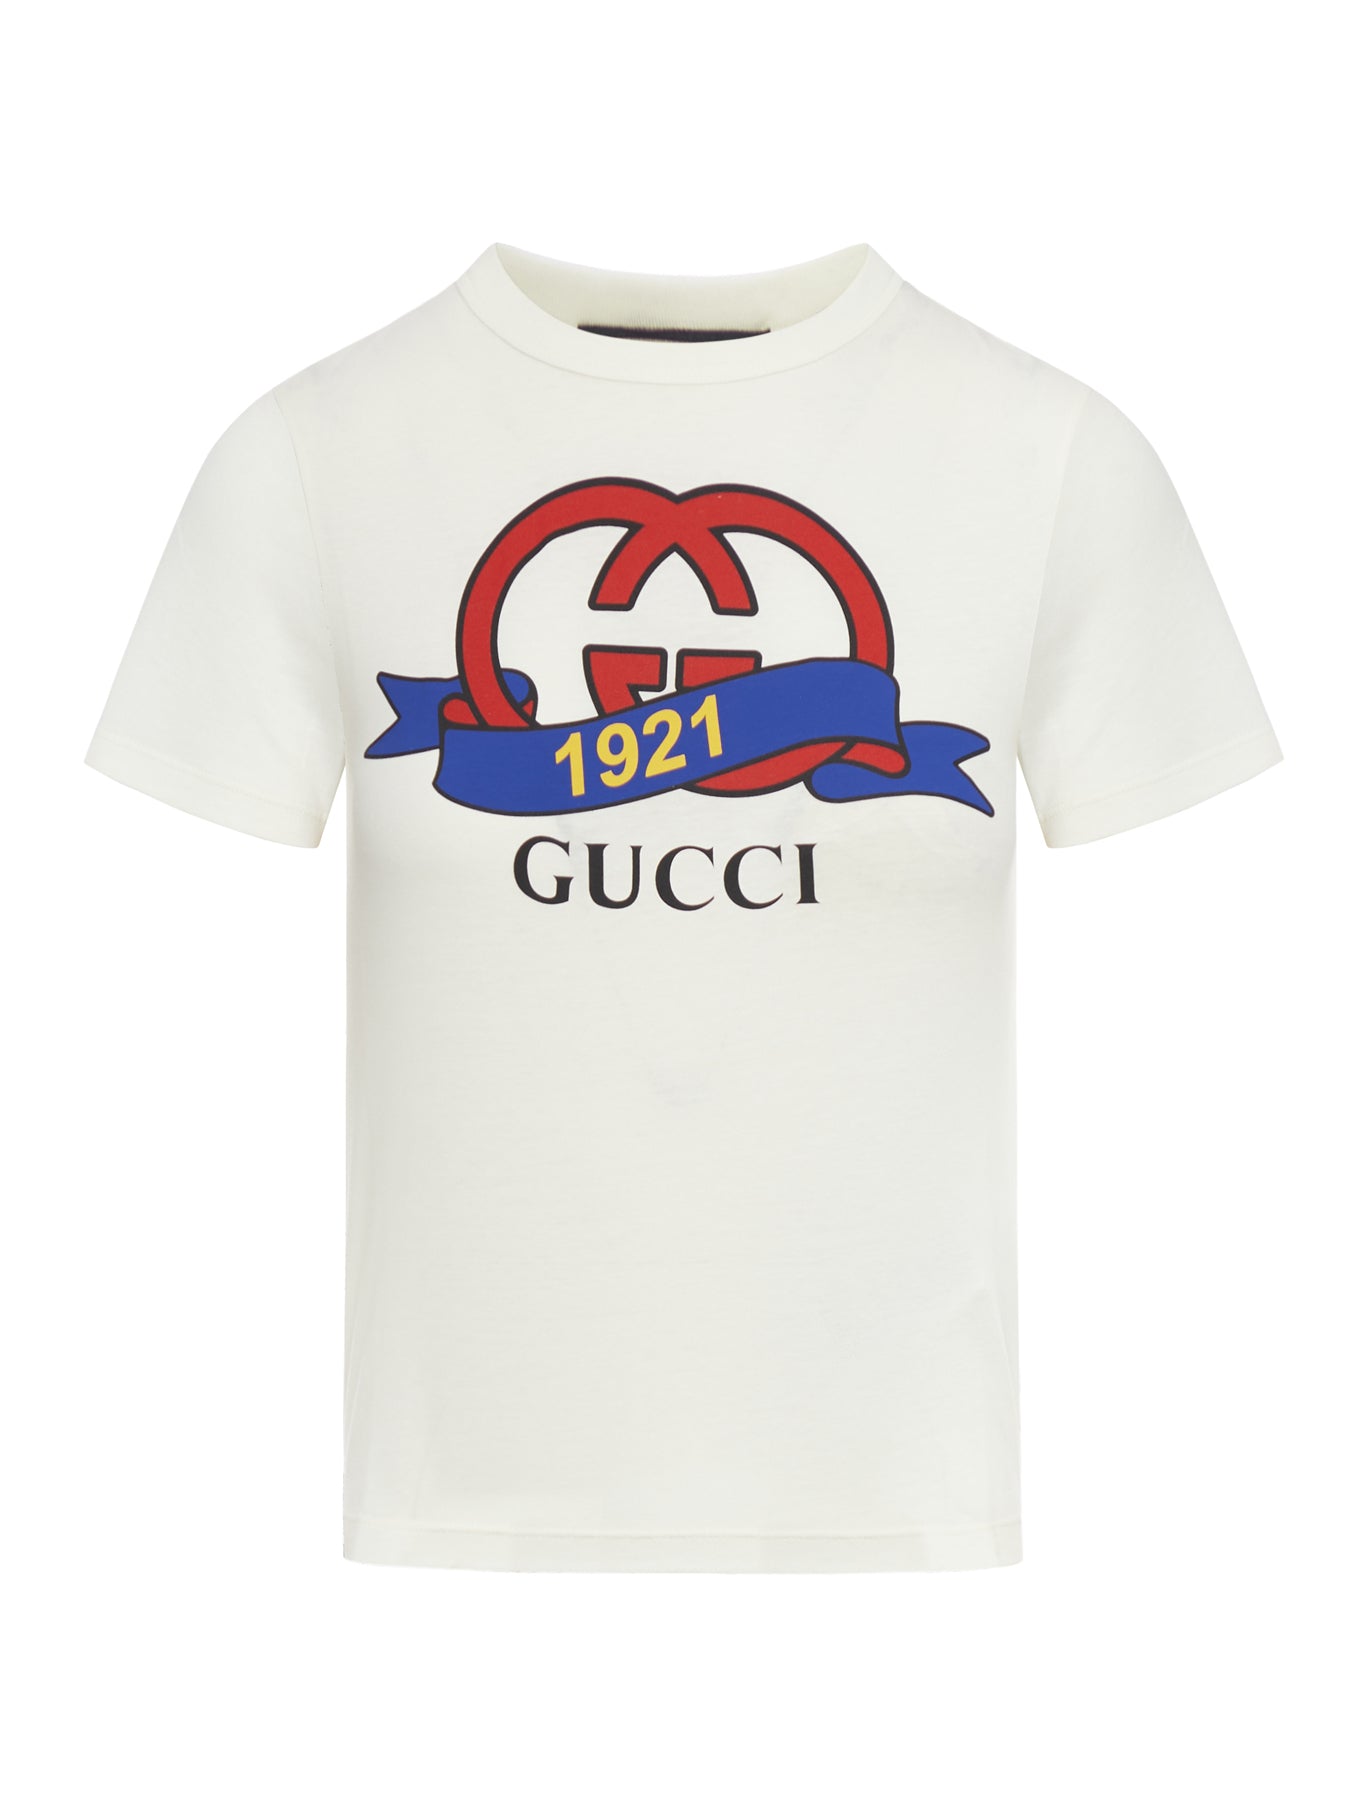 COTTON T-SHIRT WITH GG GUCCI 1921 CROSS PRINT